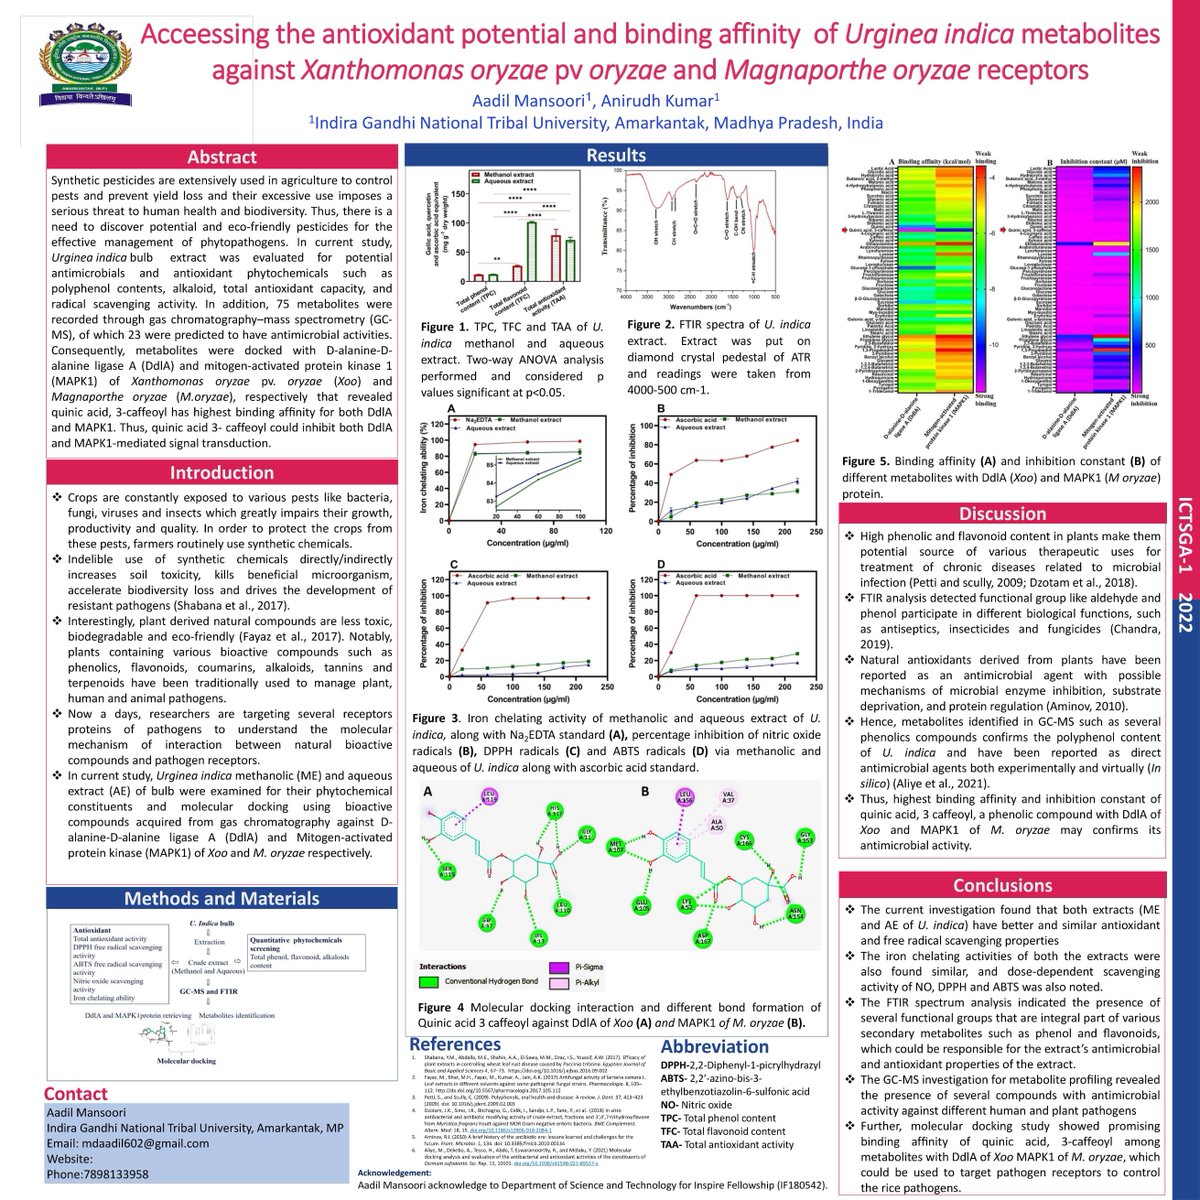 test Twitter Media - #ictsga2022poster #ictsga2022_S1
Accessing the antioxidant potential and binding affinity of Urginea indica metabolites against Xanthomonas oryzae pv. oryzae and Magnaporthe oryzae receptors https://t.co/MhPF61hLkv